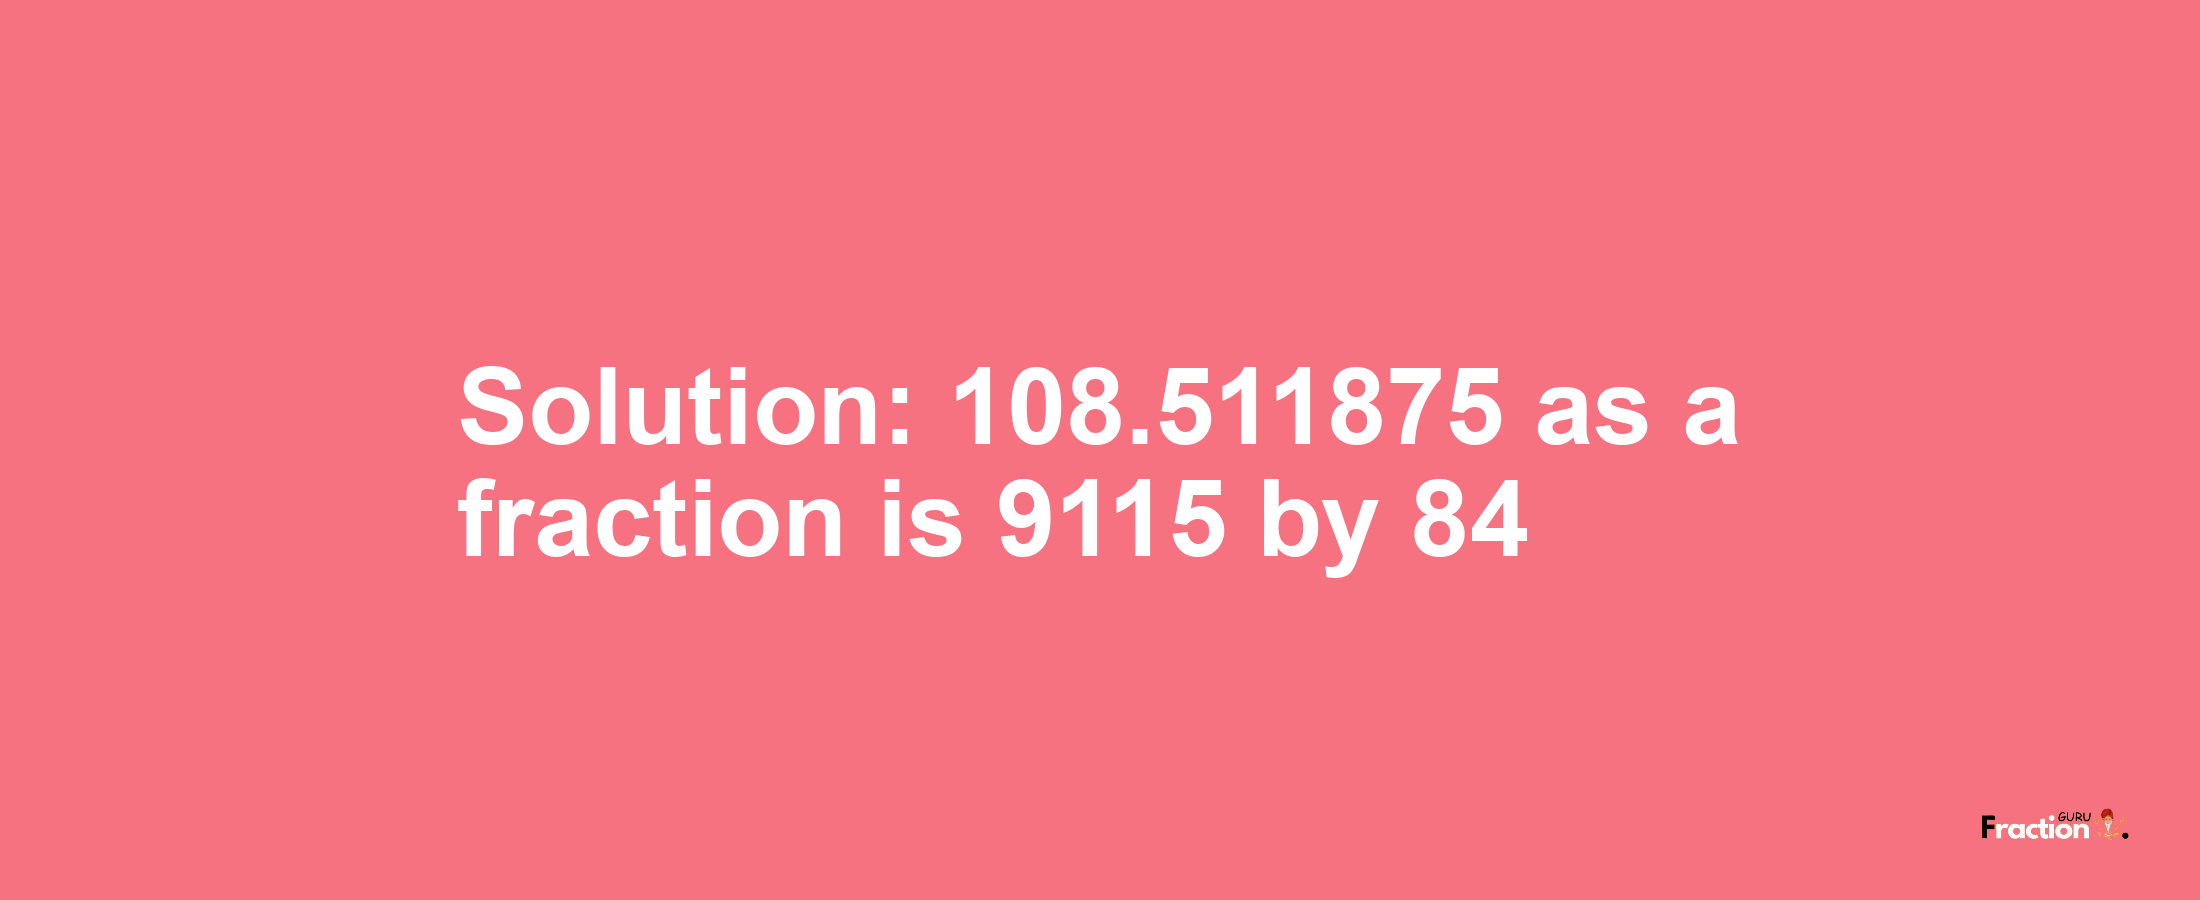 Solution:108.511875 as a fraction is 9115/84